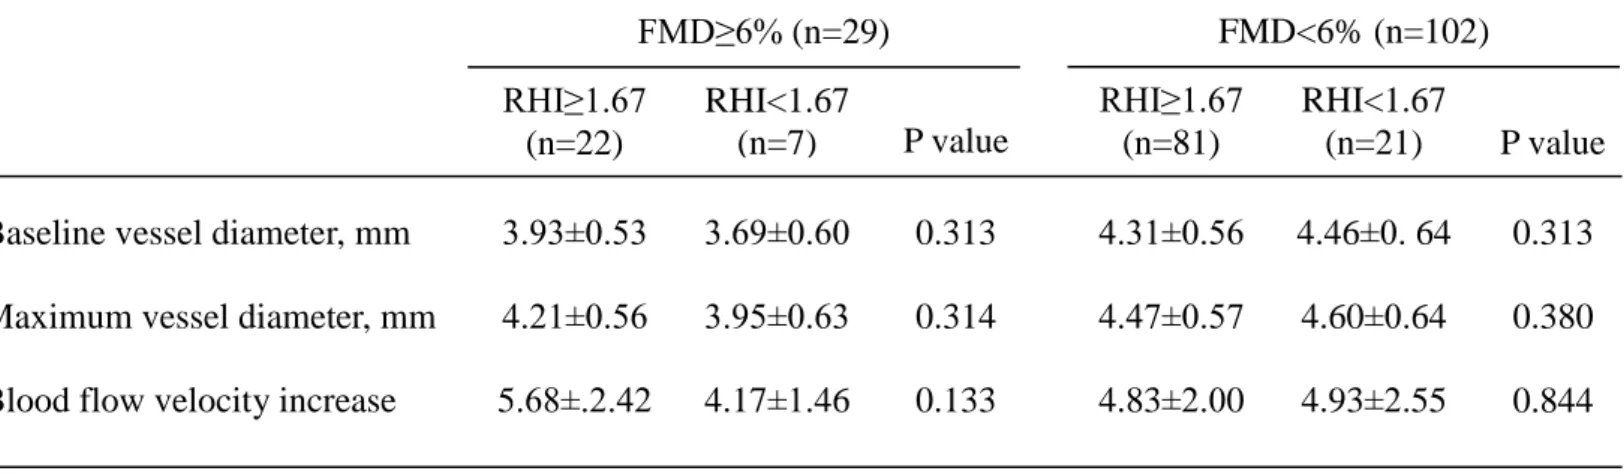 Table 3  Other parameters measured during FMD procedure 